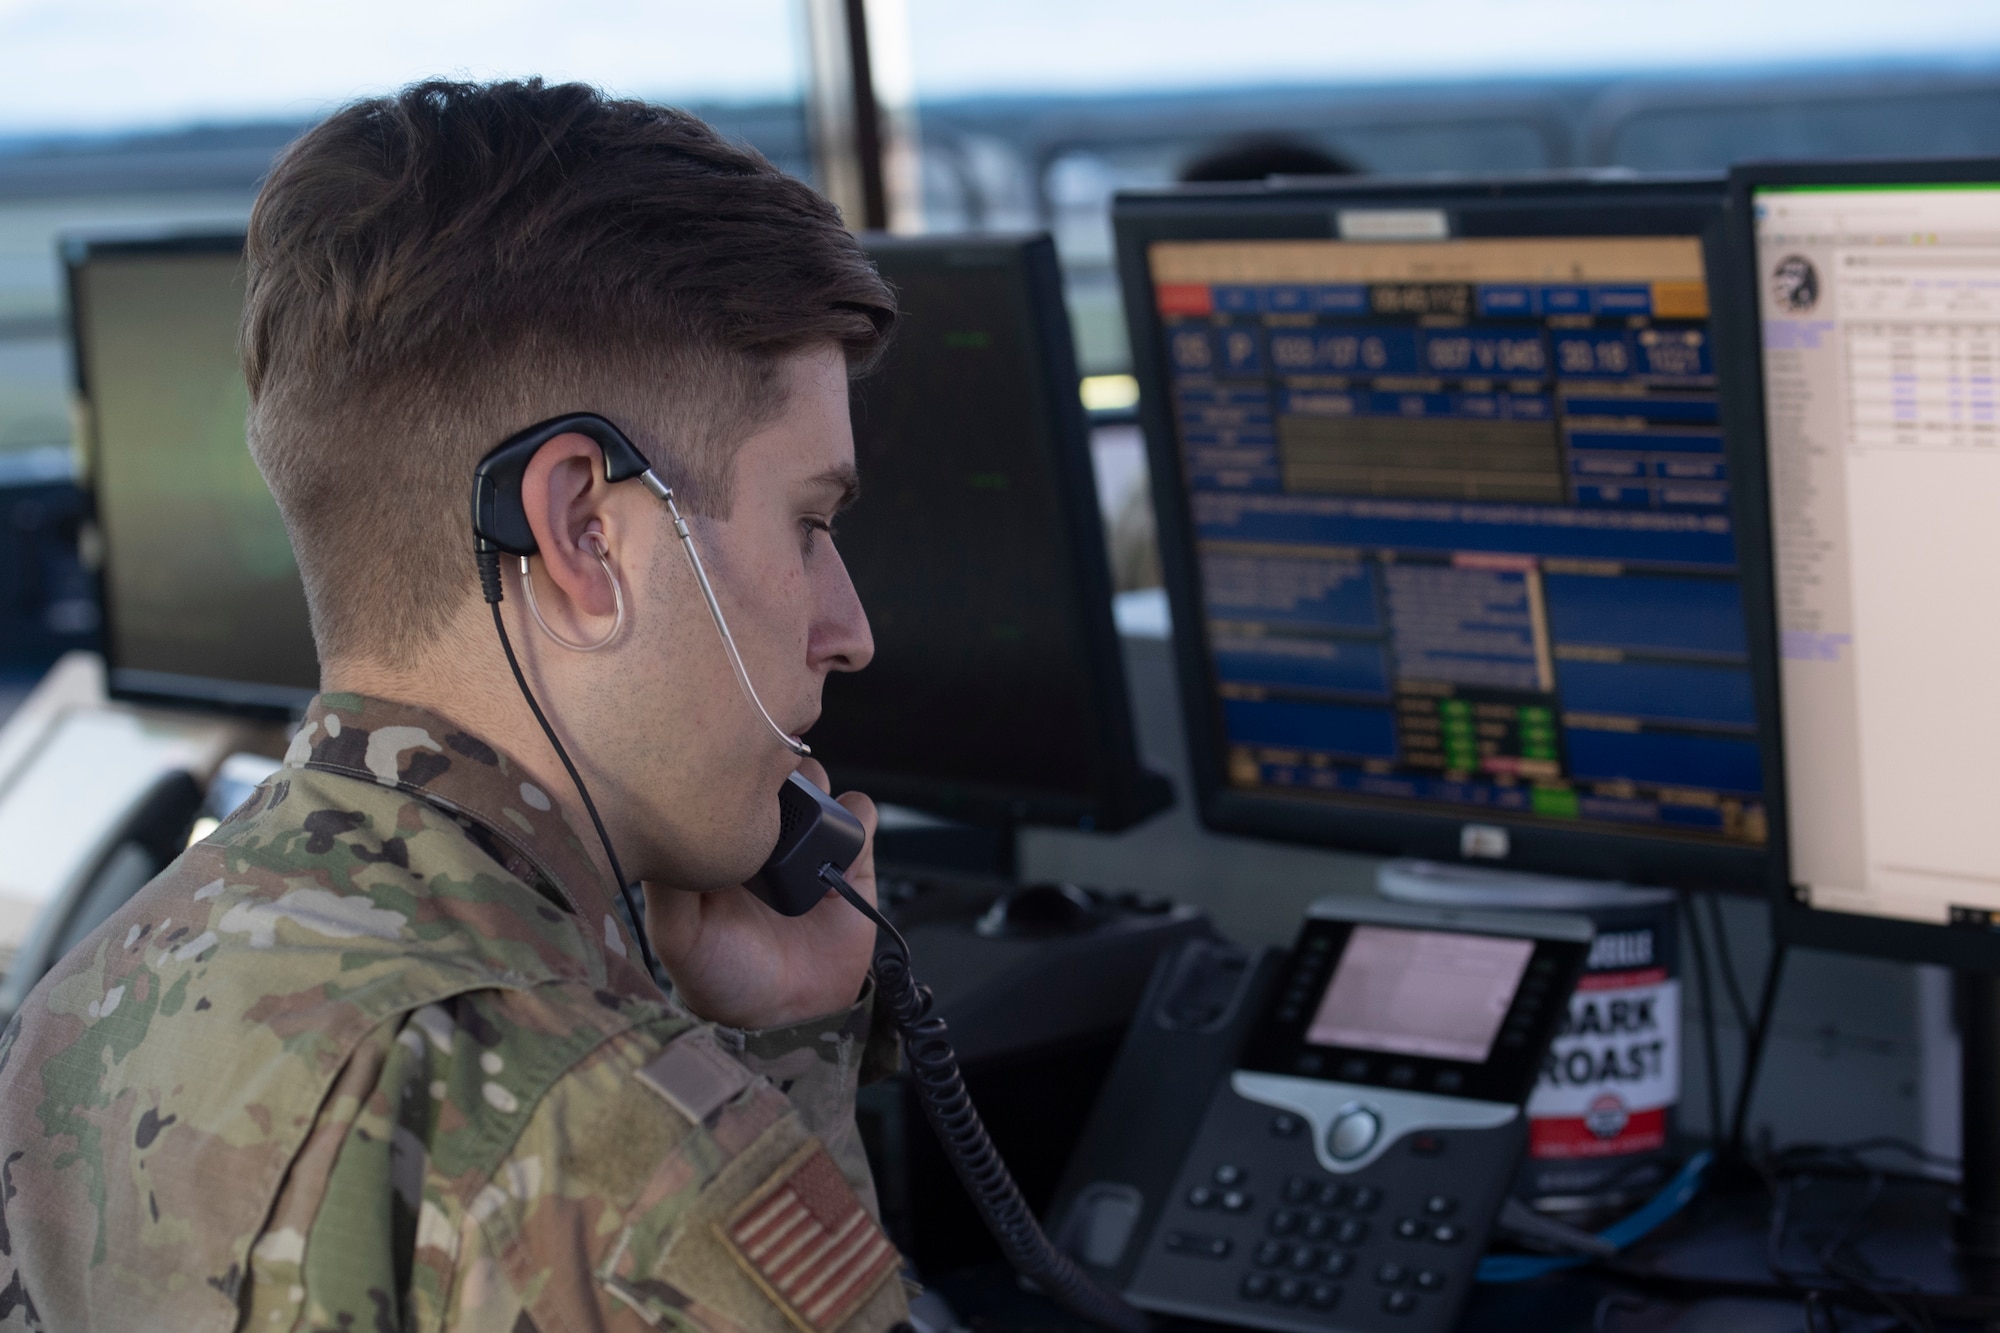 U.S. Air Force Staff Sgt. Austin Rood, 52nd Operations Support Squadron air traffic control specialist, discusses information about an incoming flight at Spangdahlem Air Base, Germany, Aug. 23, 2021.